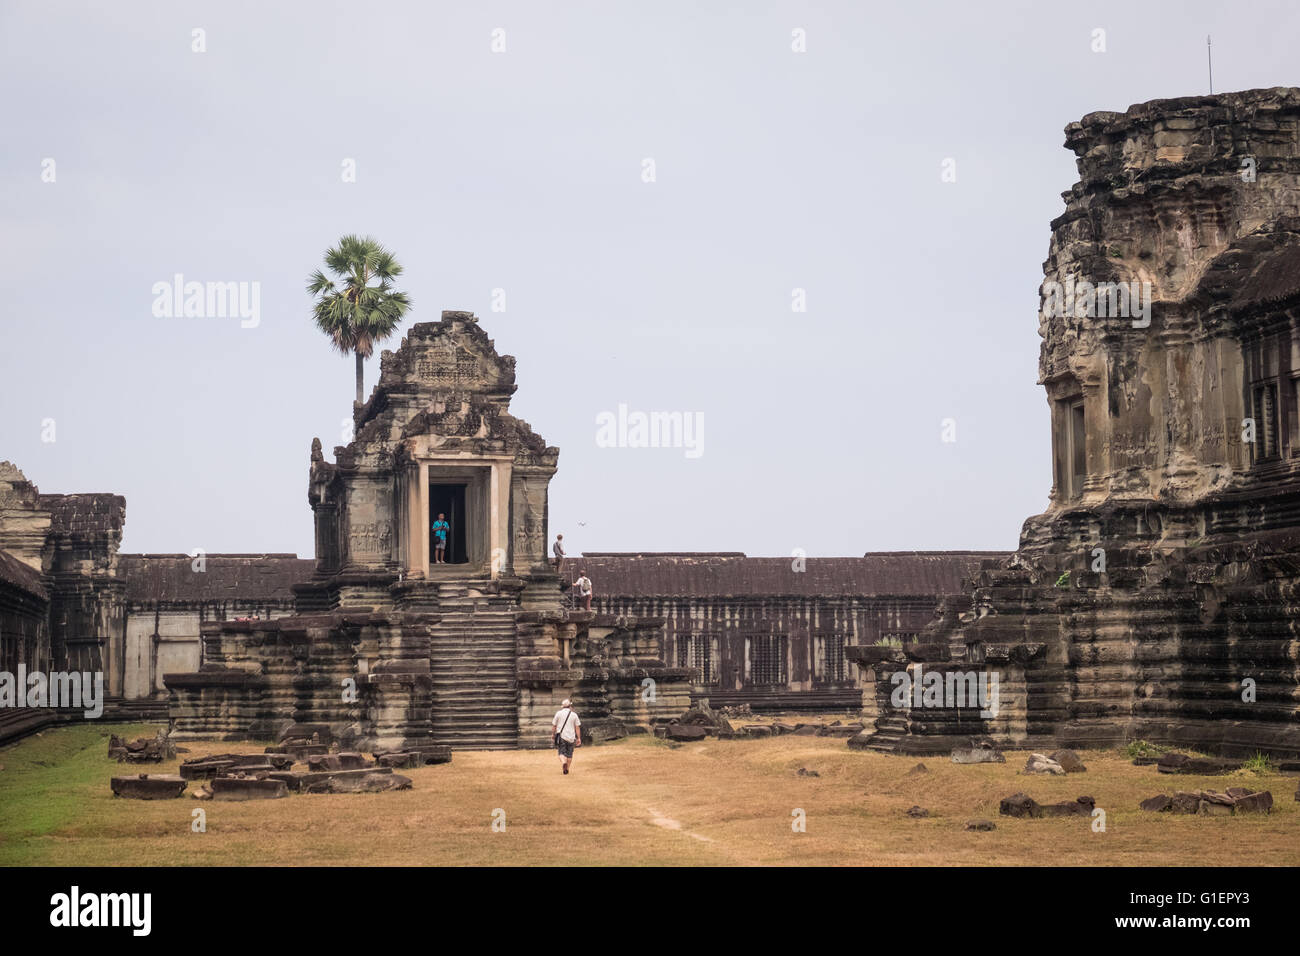 Detailed stone carvings in Angkor Wat, Cambodia Stock Photo